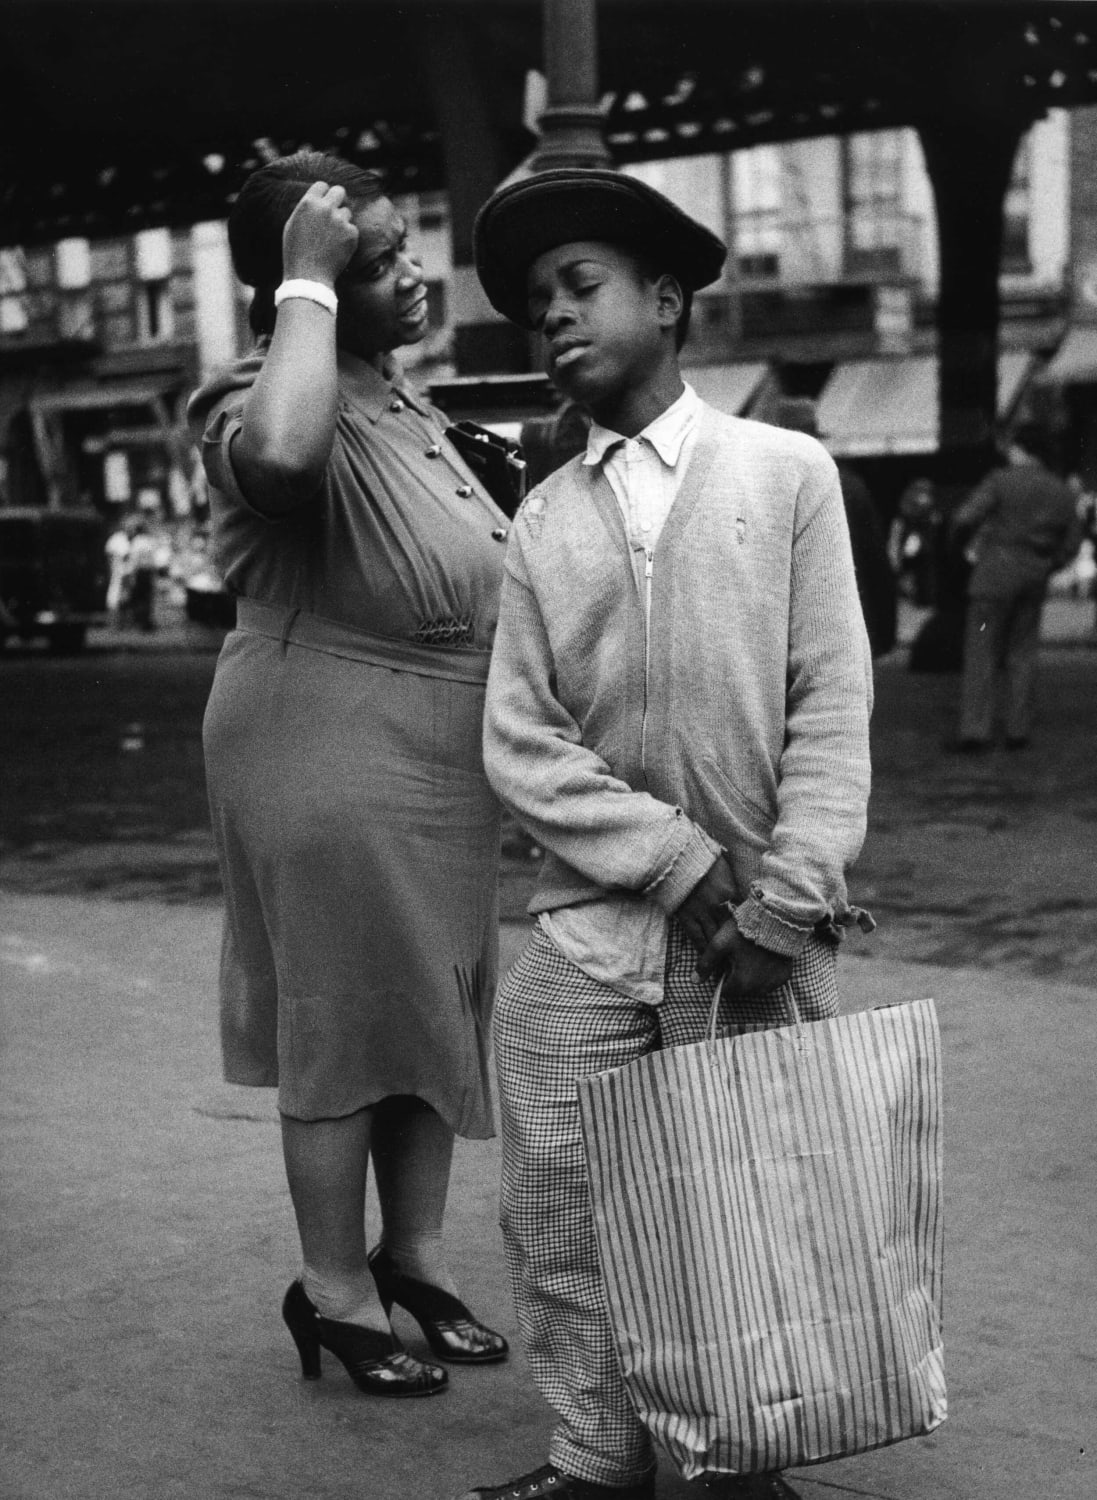 Mother and son shopping, Ninth Ave, New York City, 1938 (photographed by Morris Engel)